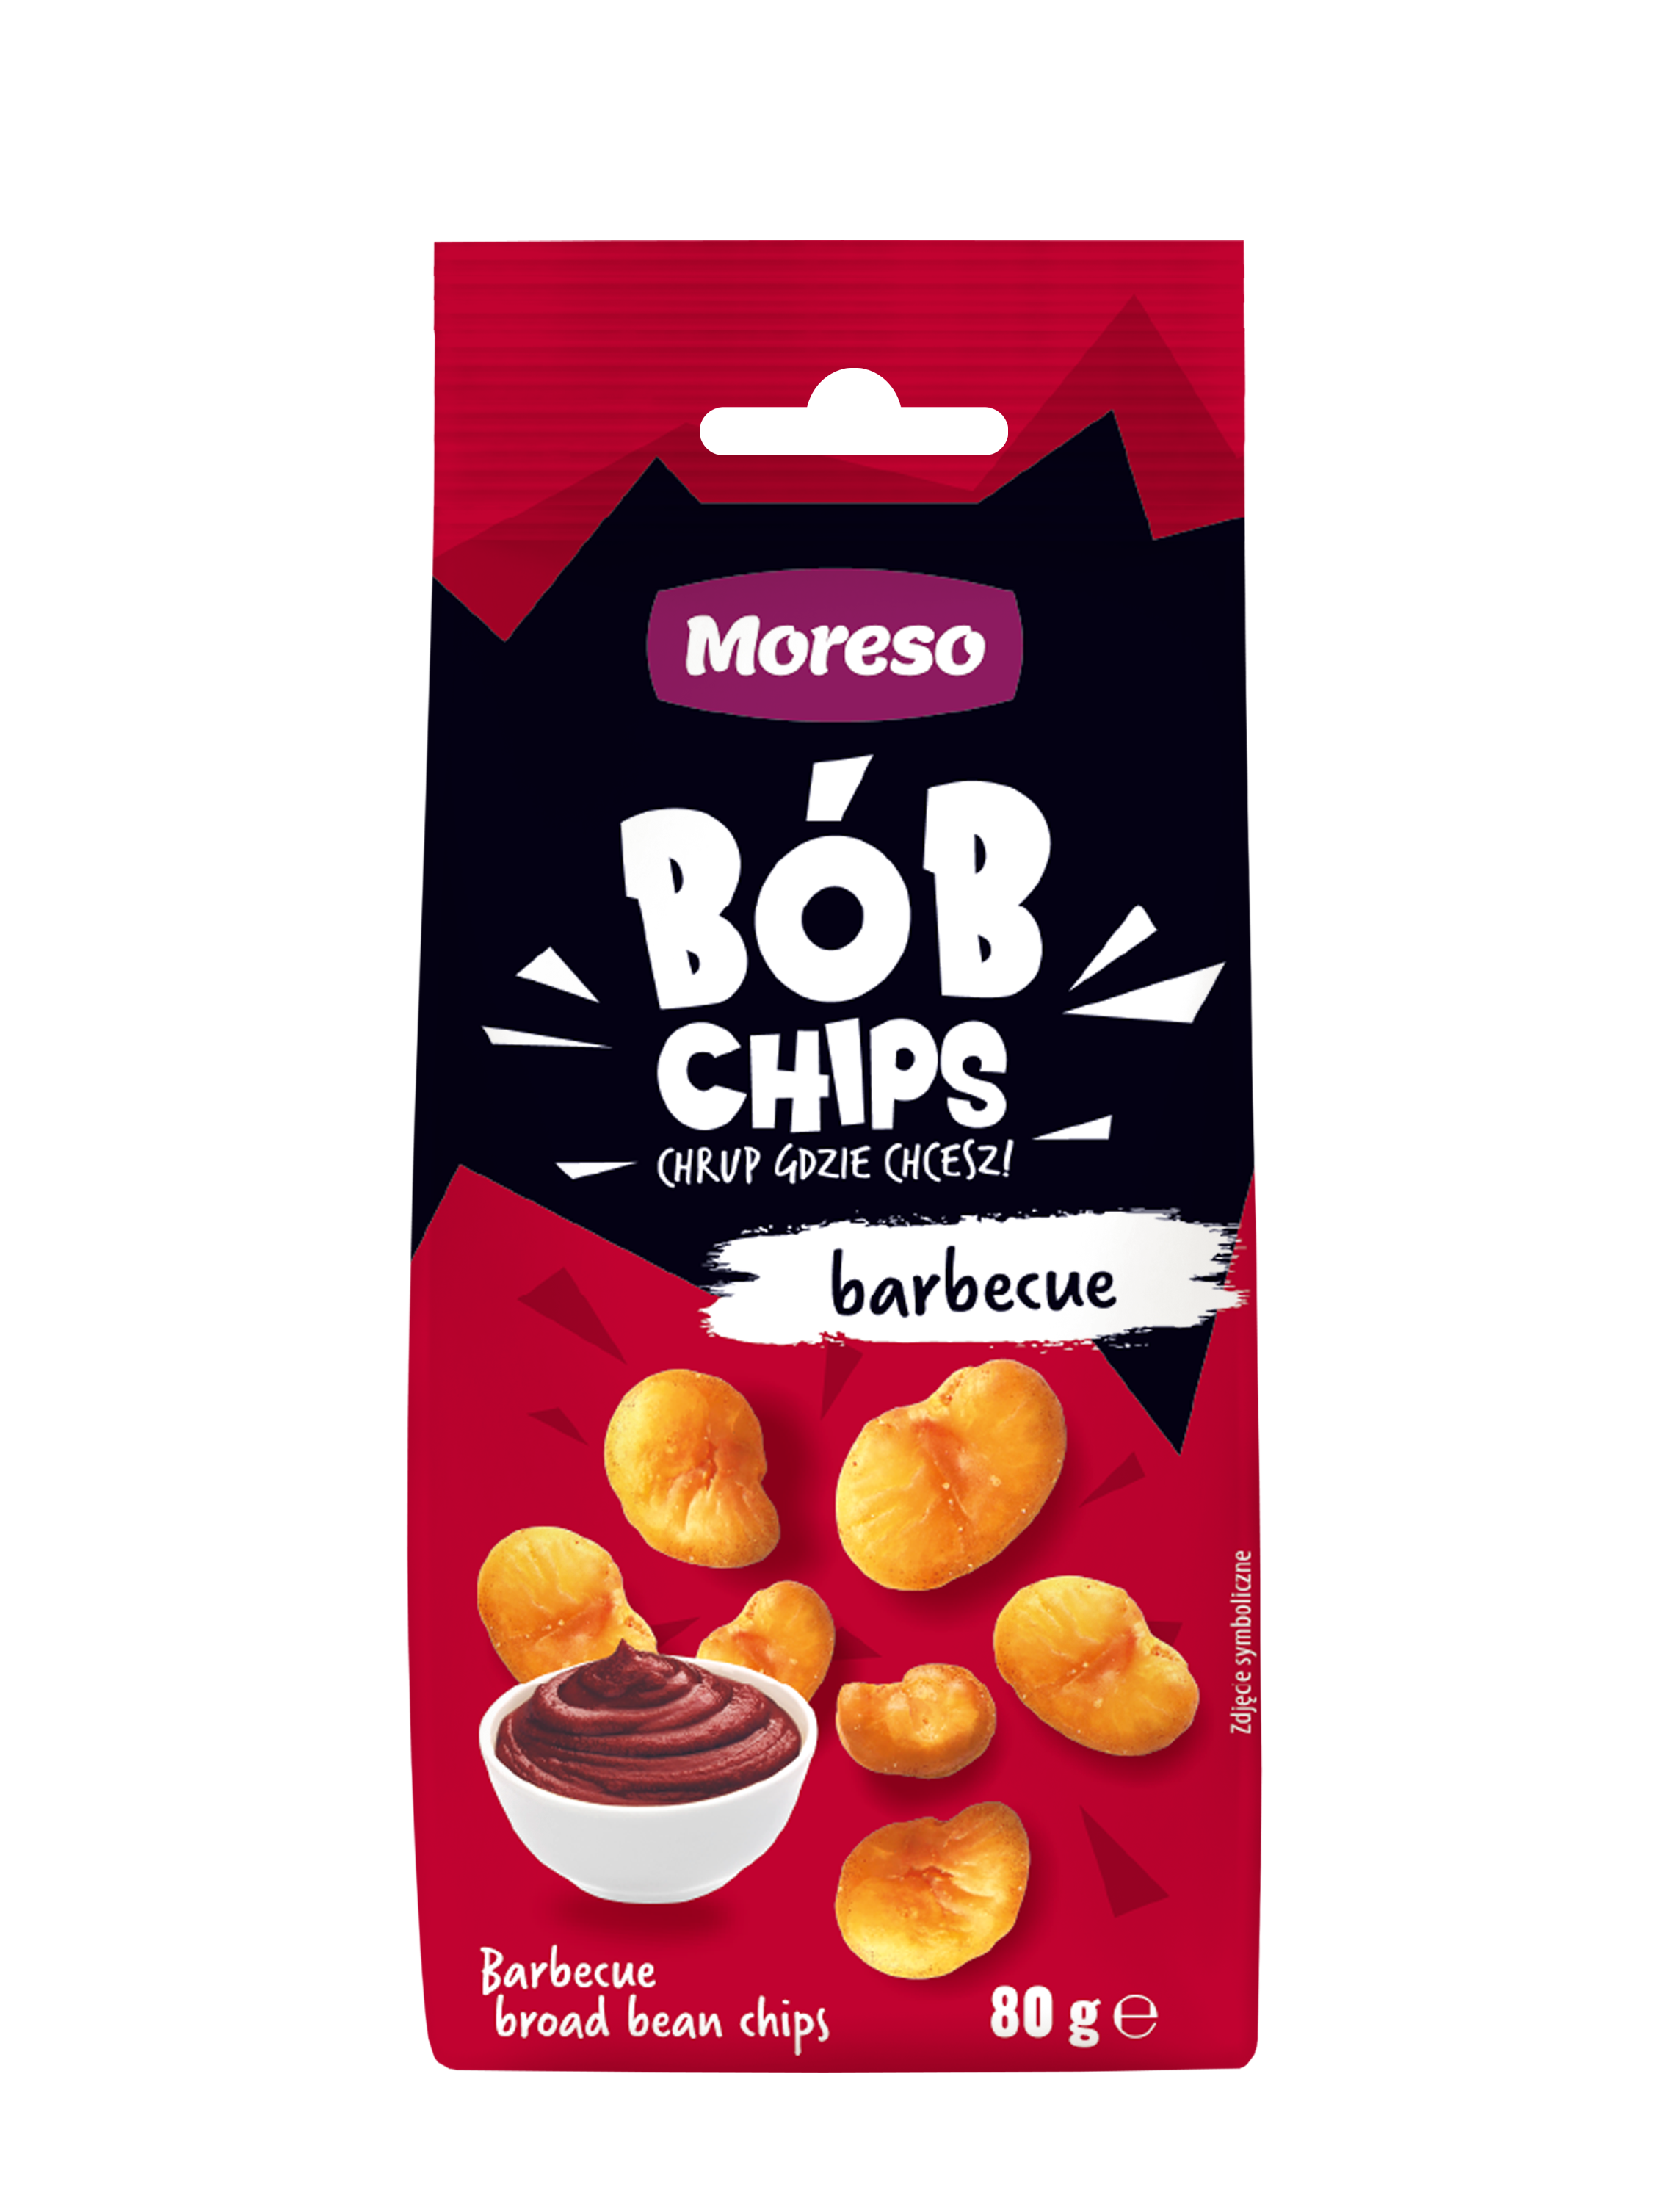 BROAD BEANS CHIPS BARBECUE 80G - Sprawdź!